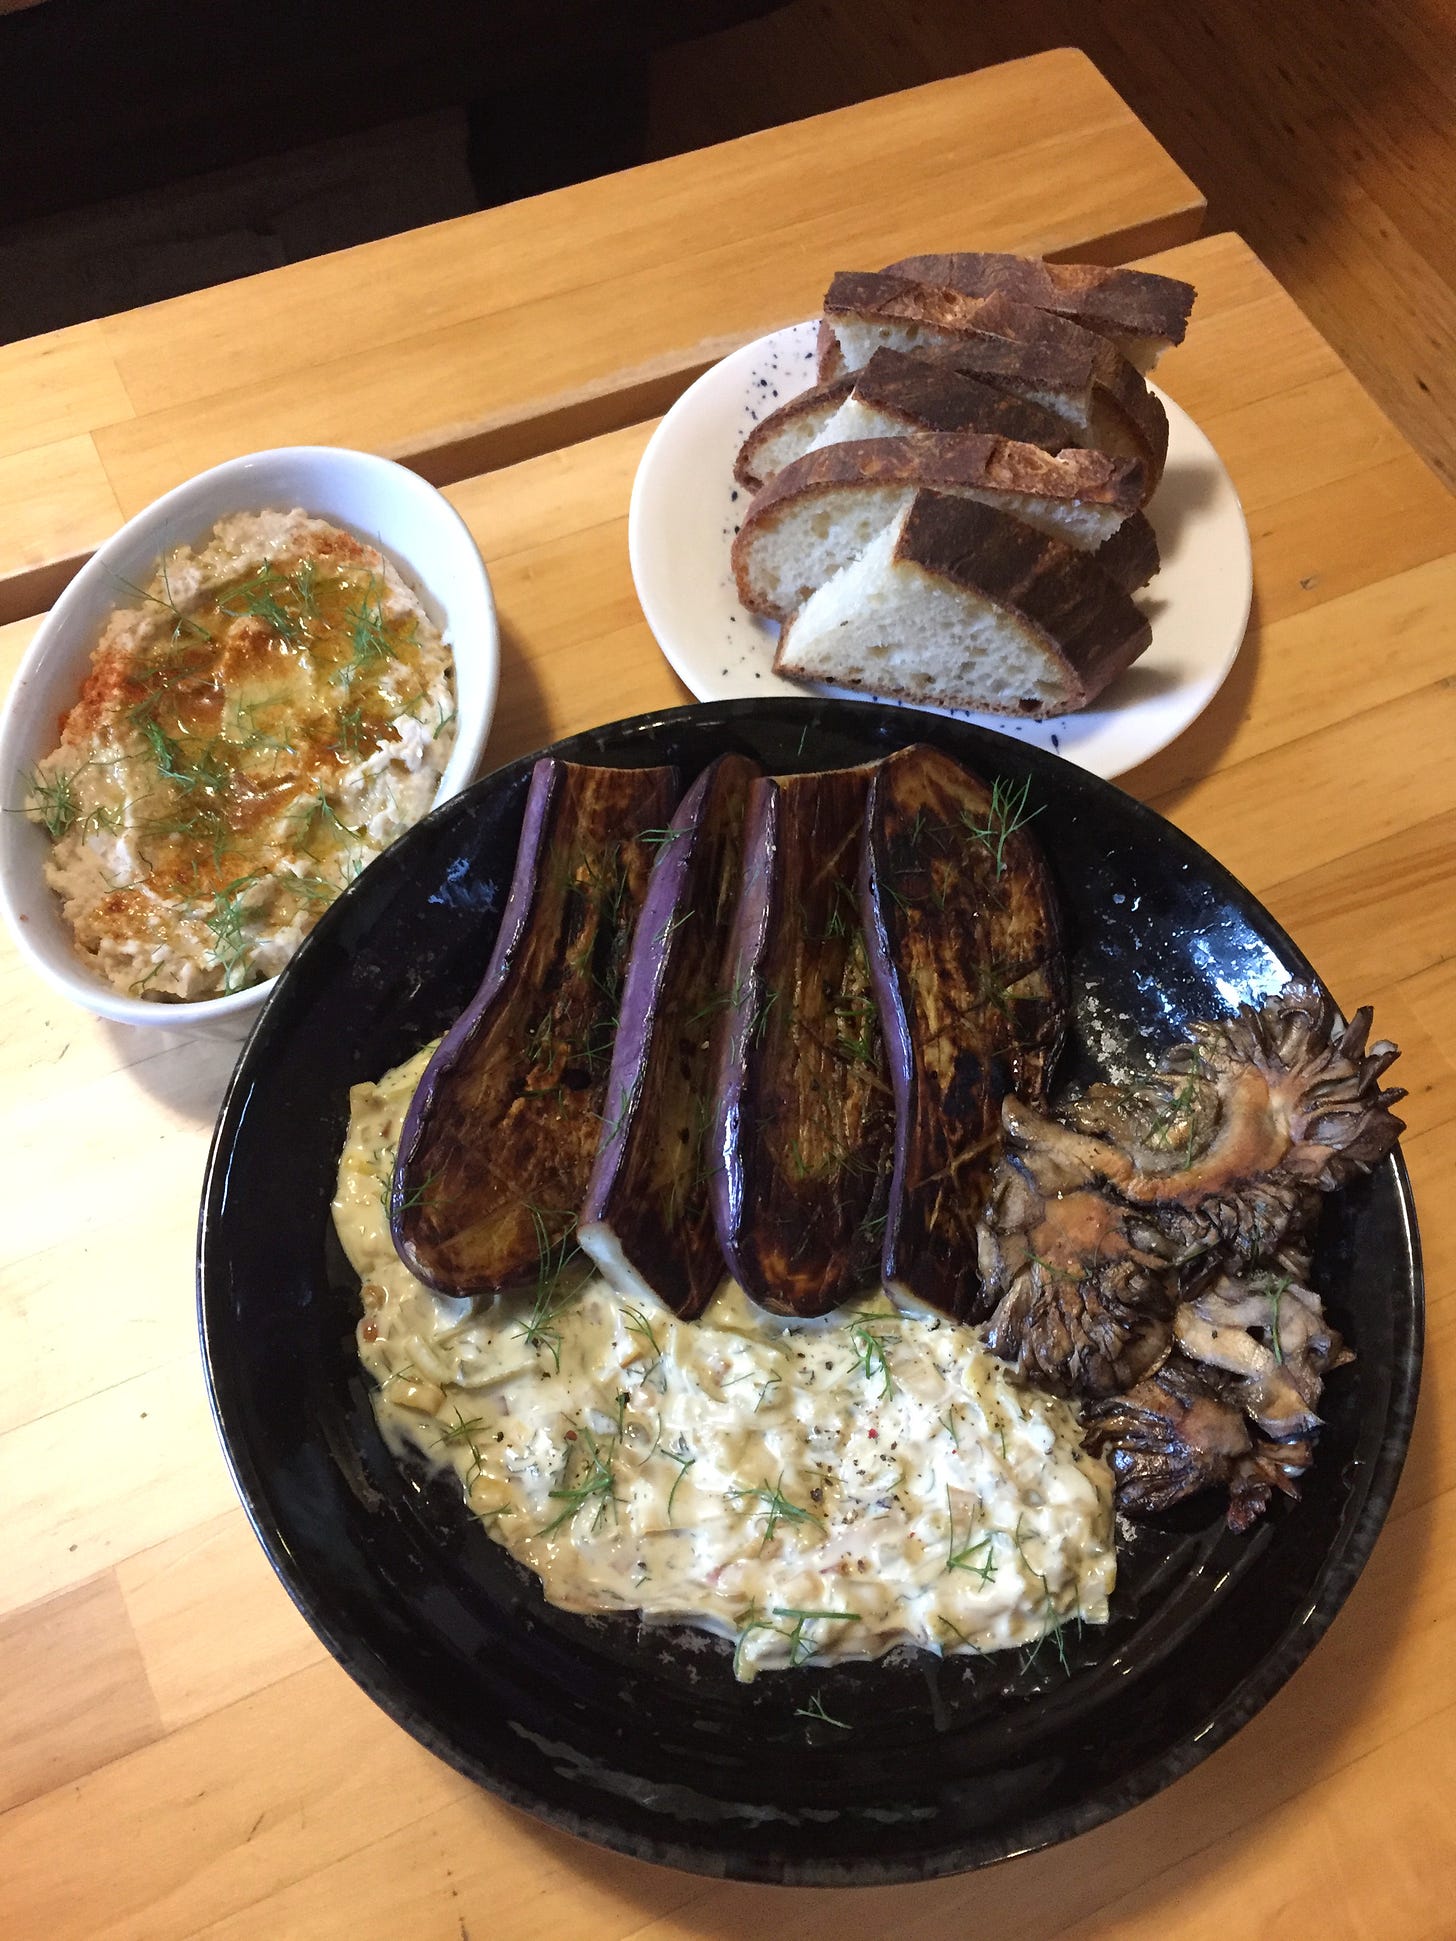 A large shallow black dish with a smear of remoulade, and nestled around it are four charred eggplant halves and big pieces of seared maitake. On a small plate are slices of sourdough with thick dark crust, and in an oblong white dish is the bean dip, coated in olive oil and dusted with spices and fennel fronds.